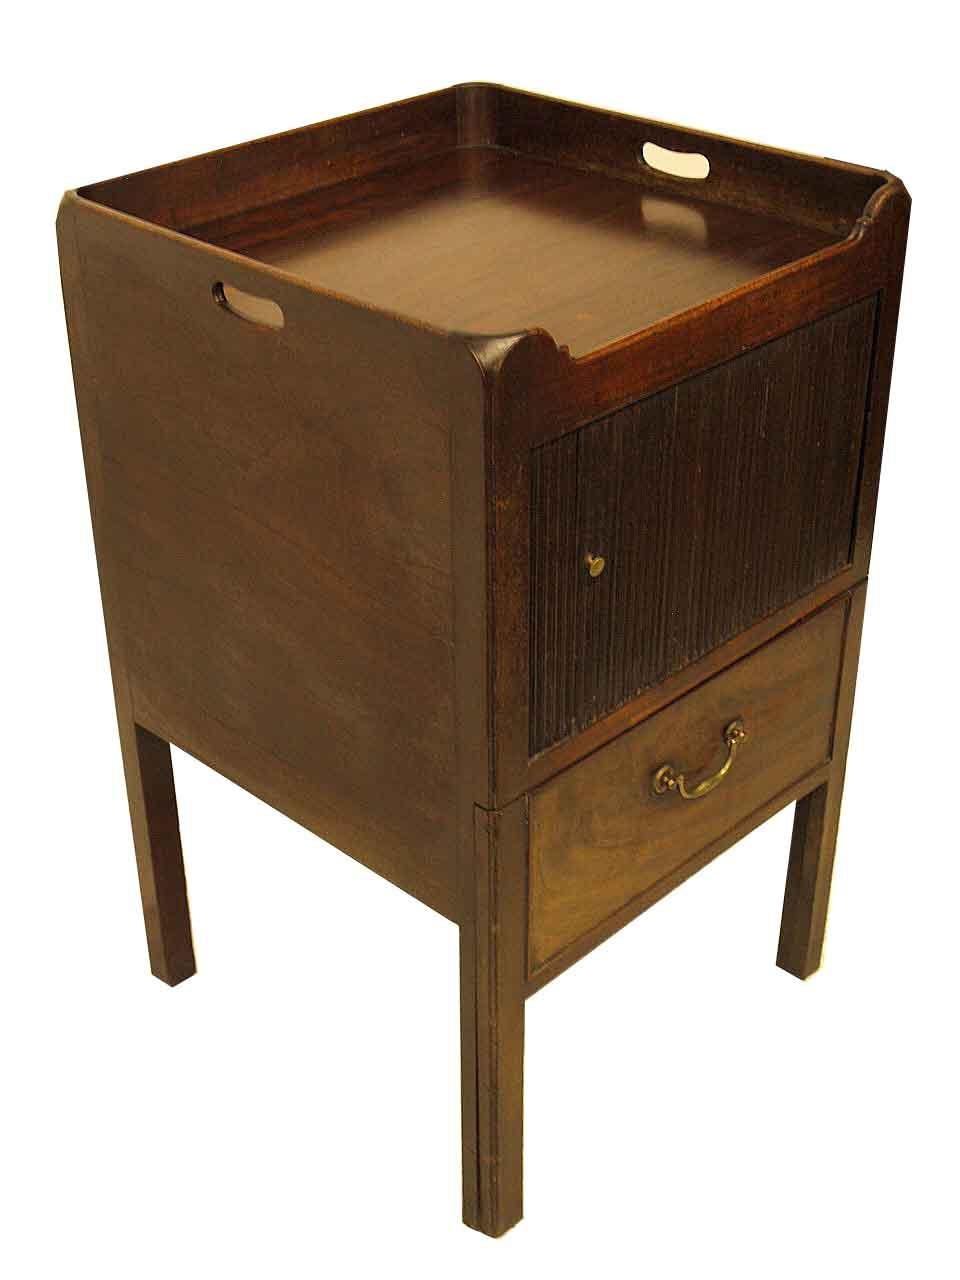 George III mahogany tray top commode, the gallery has openings on the sides for carrying; the sliding tambour front reveals open interior. The front legs were made in two pieces (see photo), originally in this lower section, there would have been a